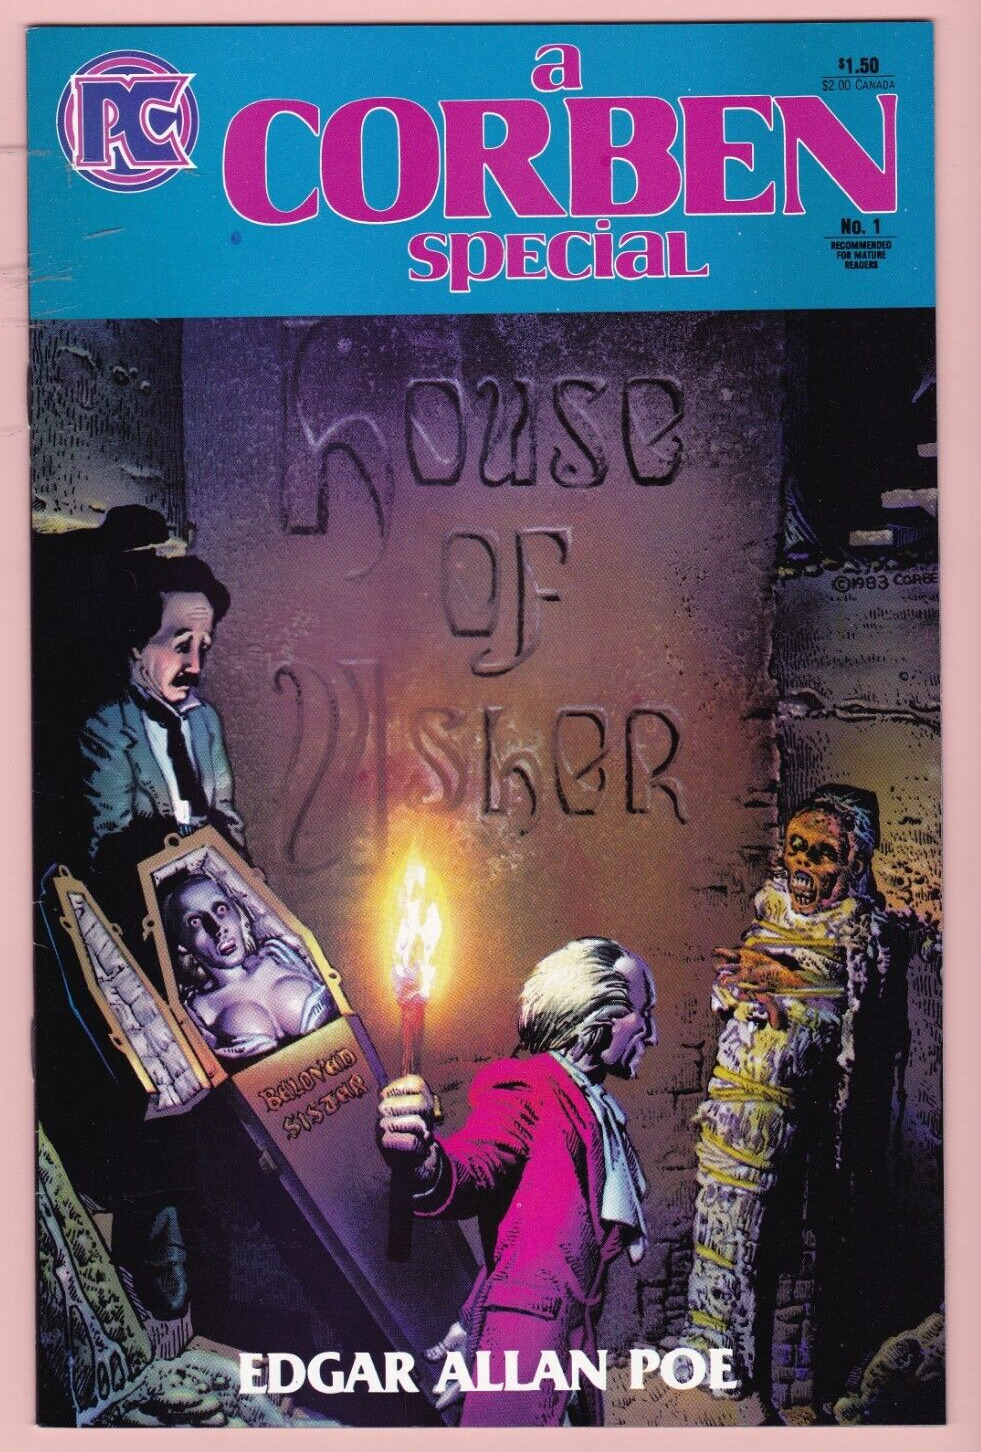 A Corben Special #1 (May 1984) - Fall of the House of Usher, one owner, NM-